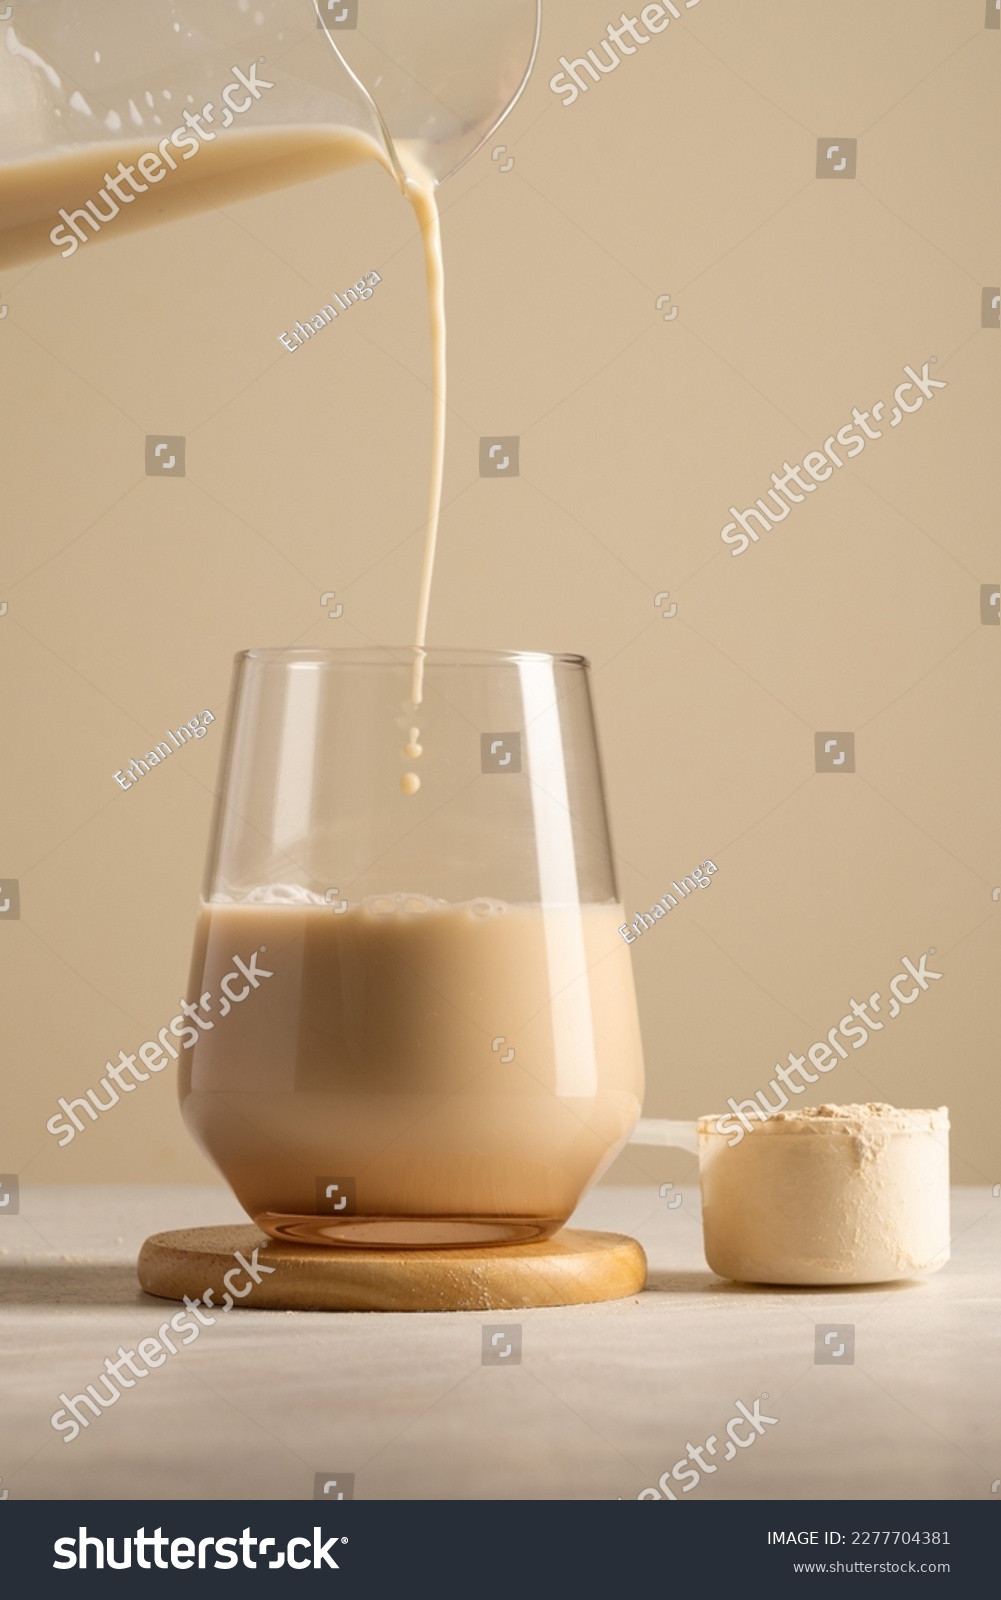 Protein powder. Pouring chocolate drink in a glass. #2277704381